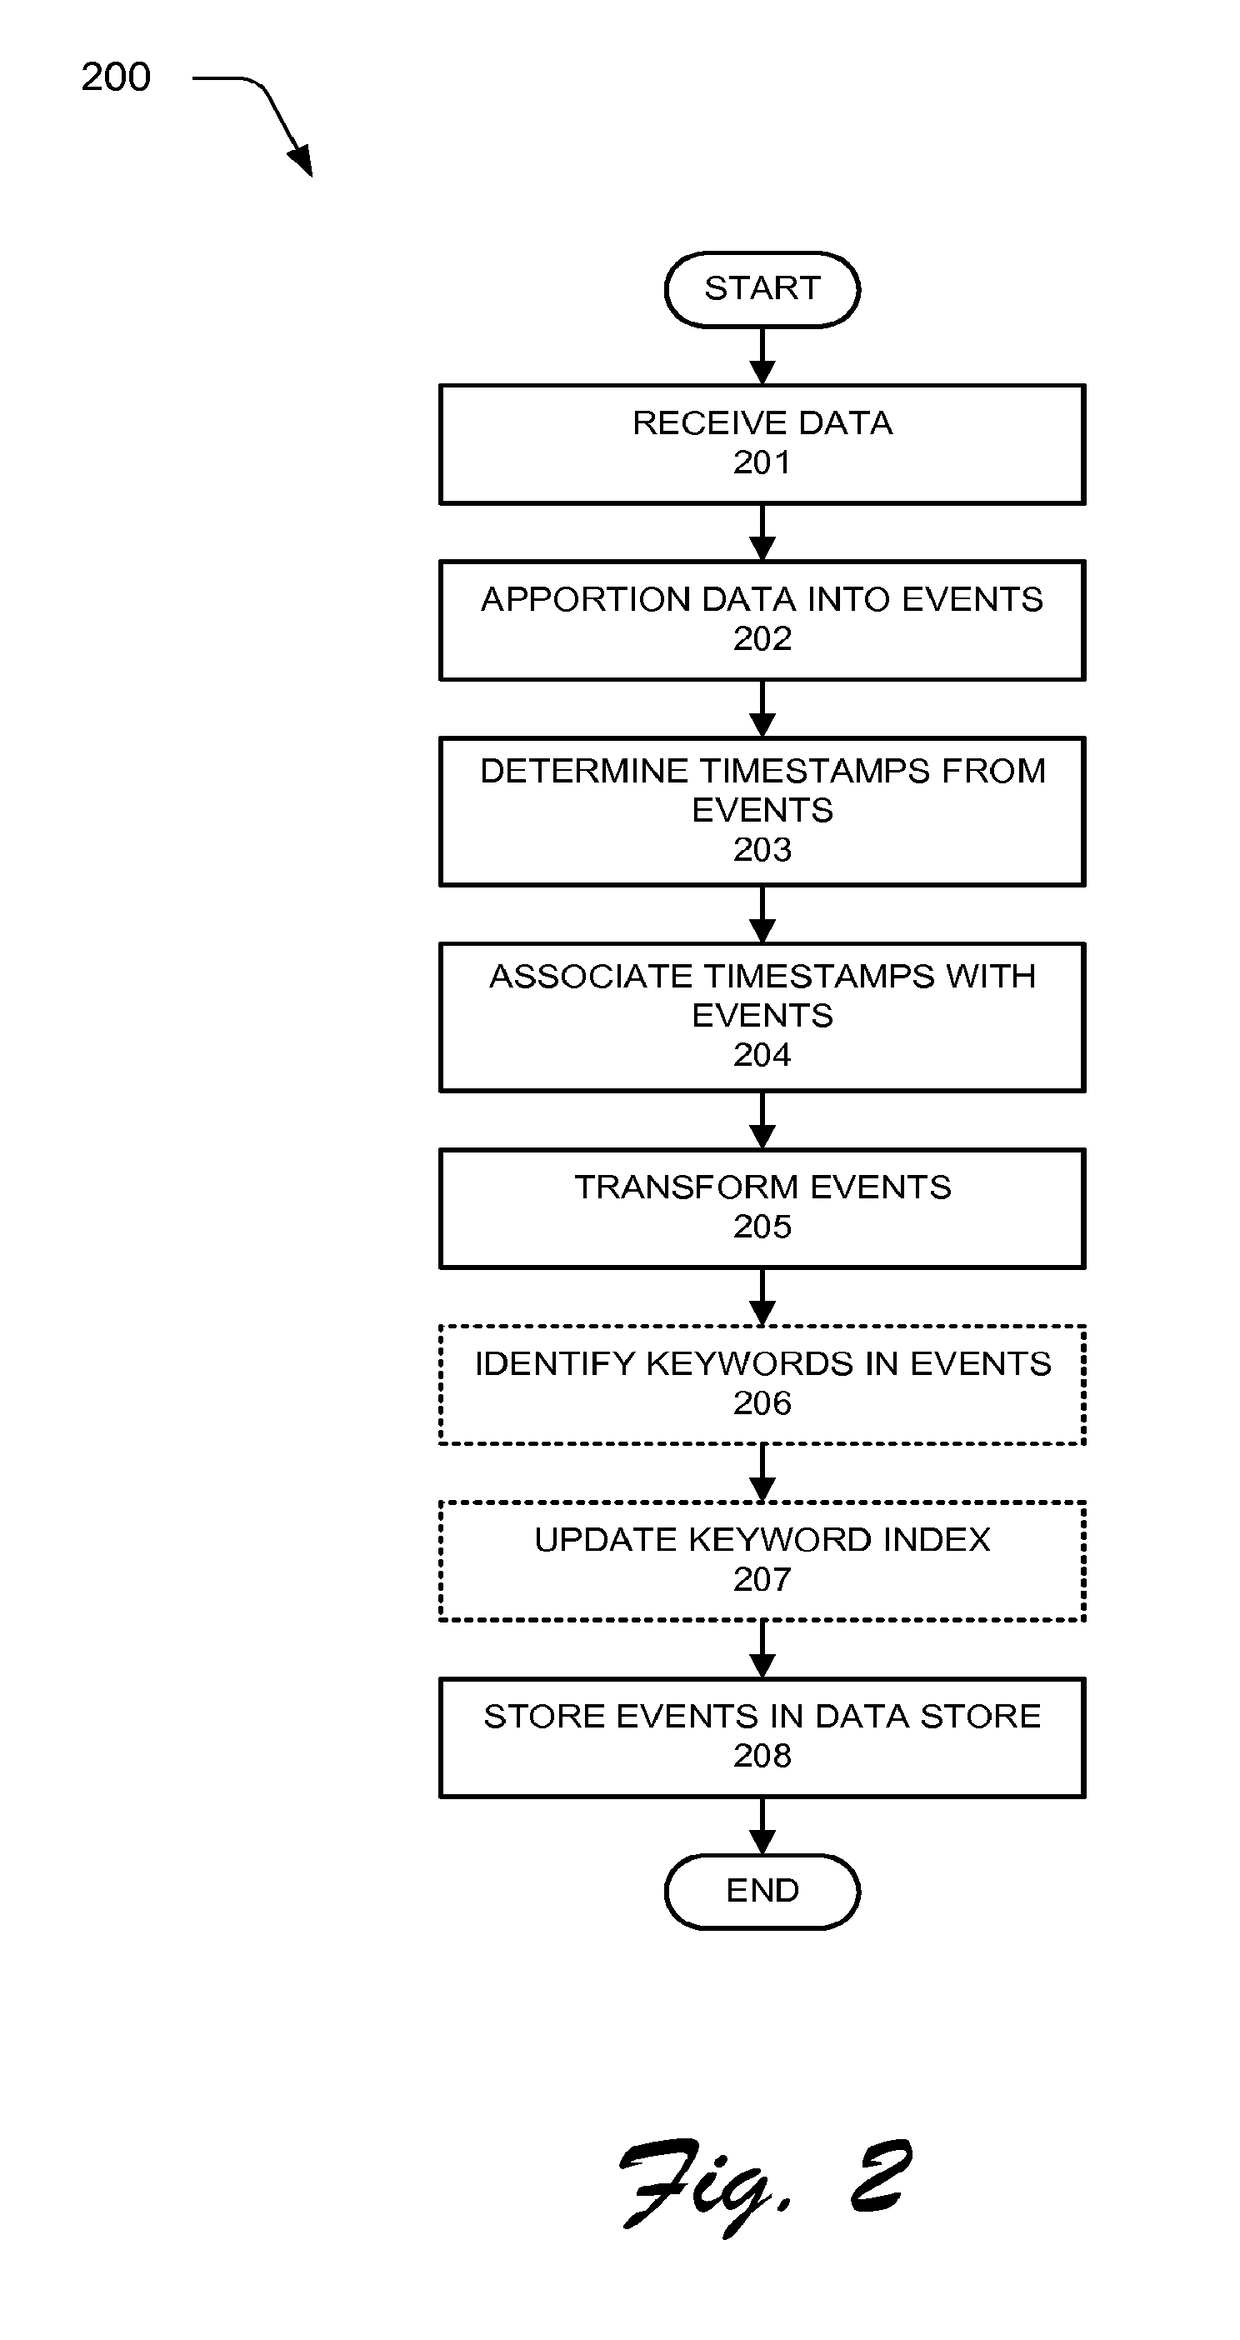 Multi-site cluster-based data intake and query systems